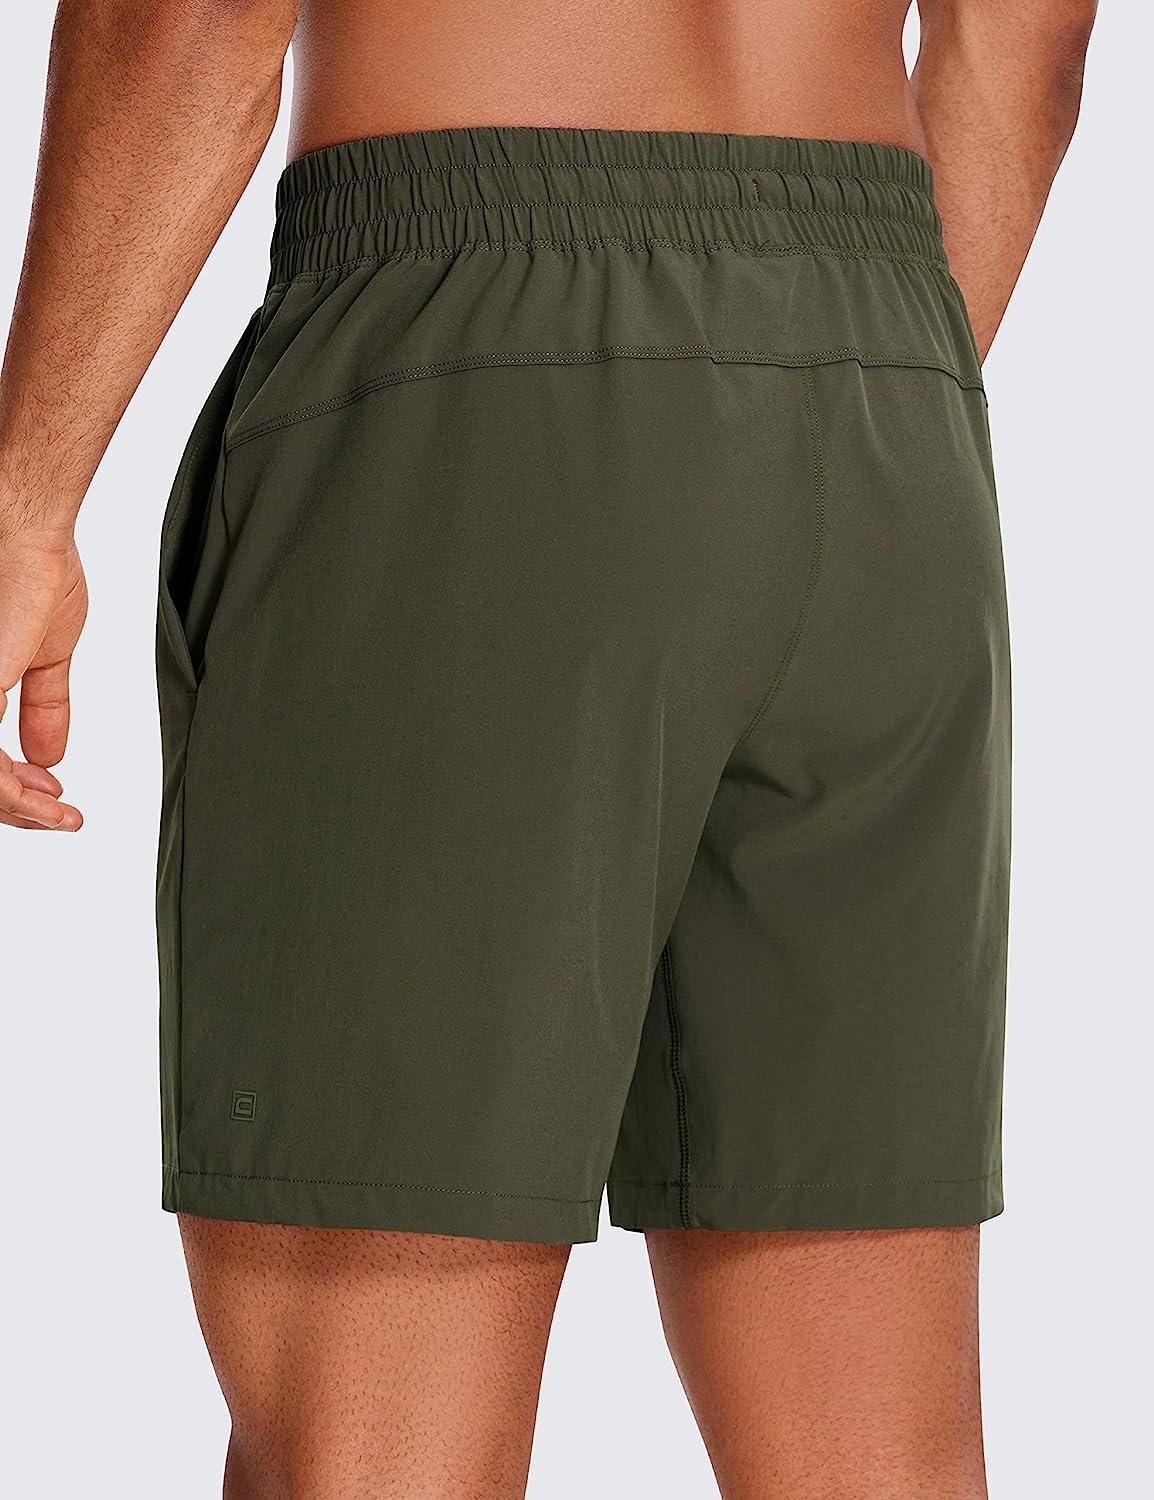 CRZ YOGA Men's 2 in 1 Running Shorts with Liner - 7''/9 Quick Dry